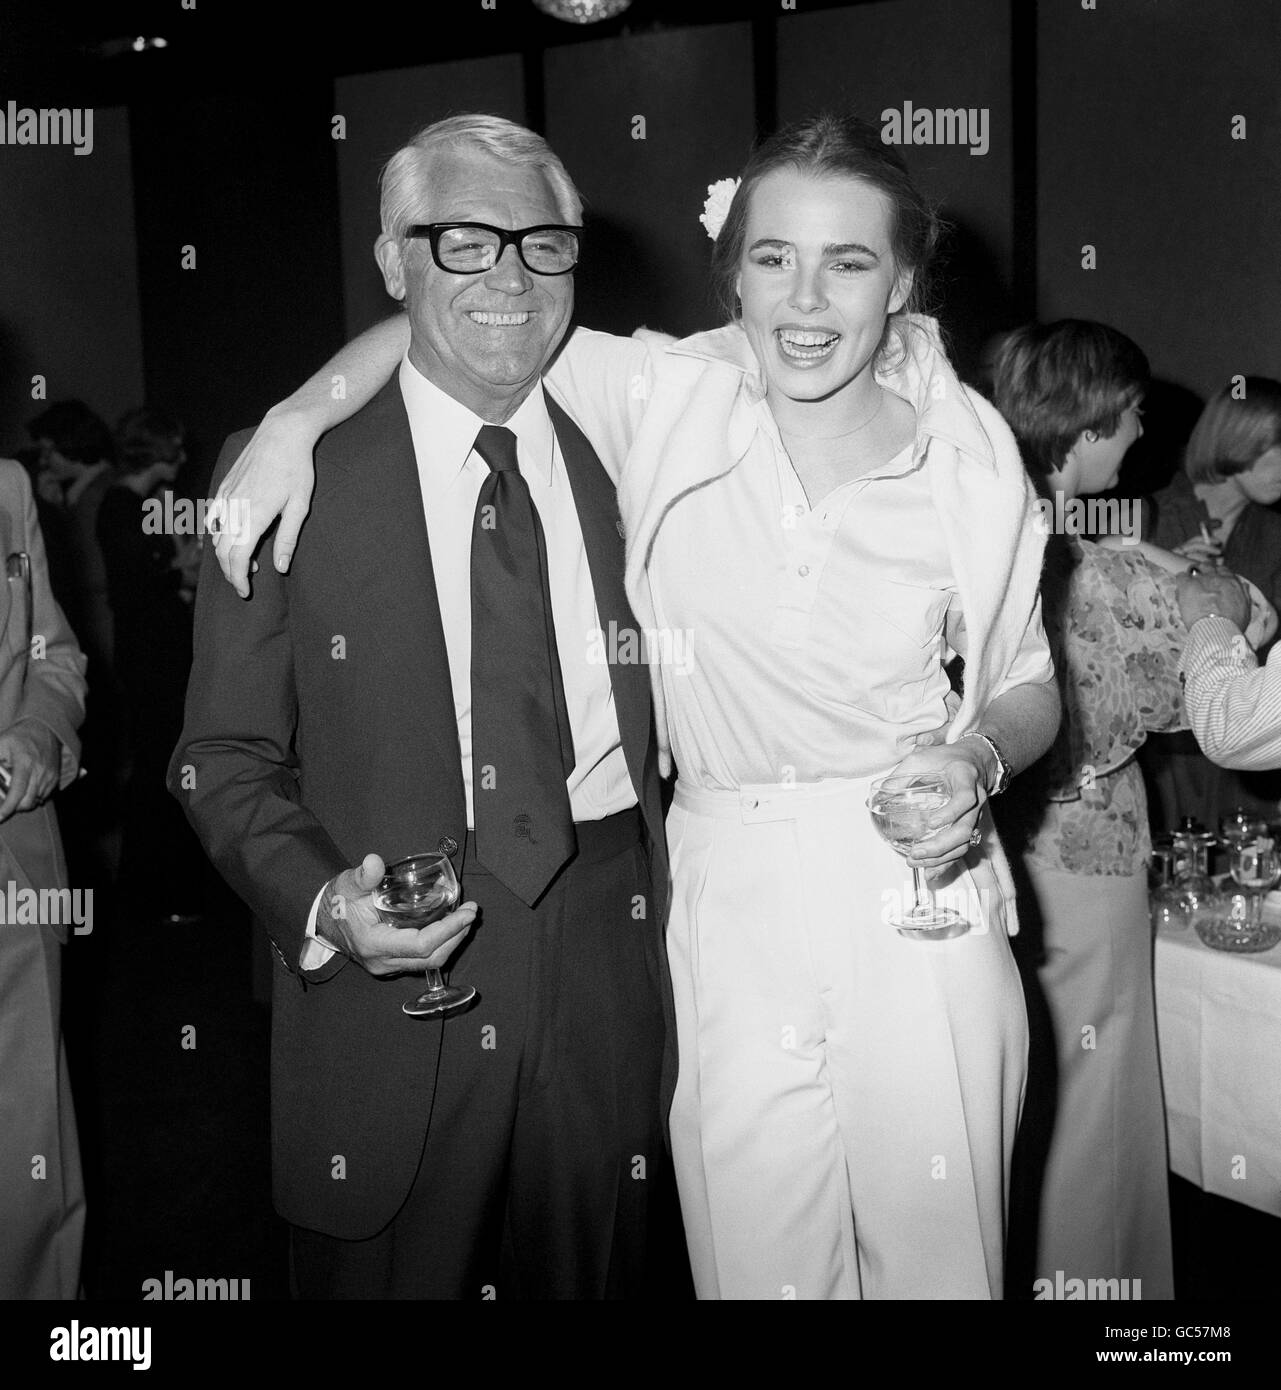 CARY GRANT AND MARGAUX HEMINGWAY AT A COCKTAIL PARTY HELD AT LONDON'S ROYAL LANCASTER HOTEL FOR SOME OF THE BIG NAMES IN SHOW BUSINESS TO MEET MISS HEMINGWAY. Stock Photo